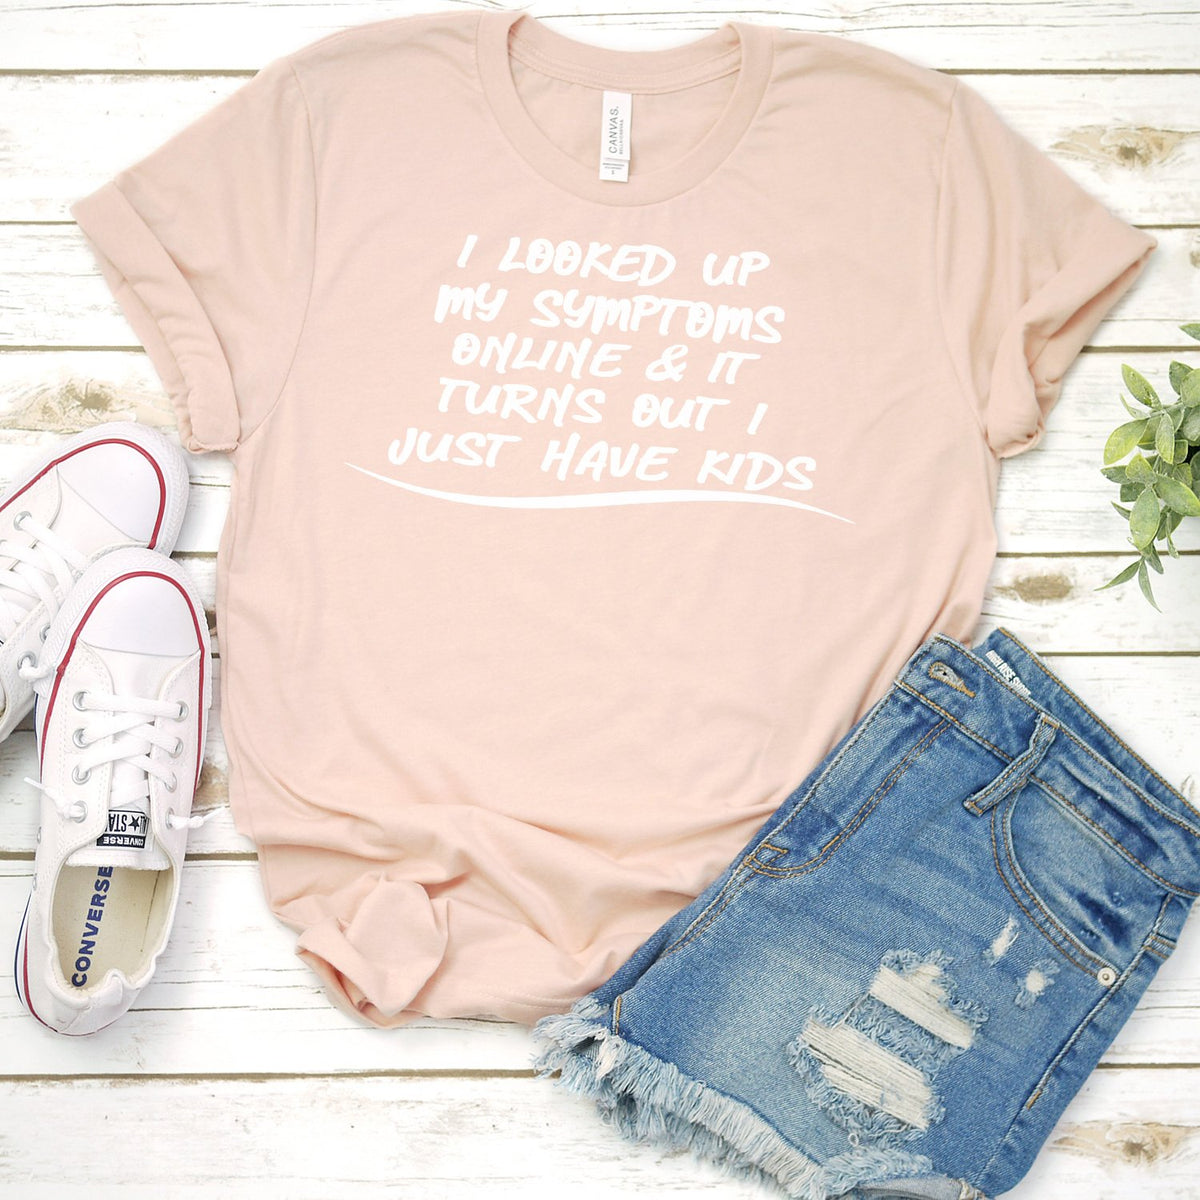 I Looked Up My Symptoms Online &amp; It Turns Out I Just Have Kids - Short Sleeve Tee Shirt